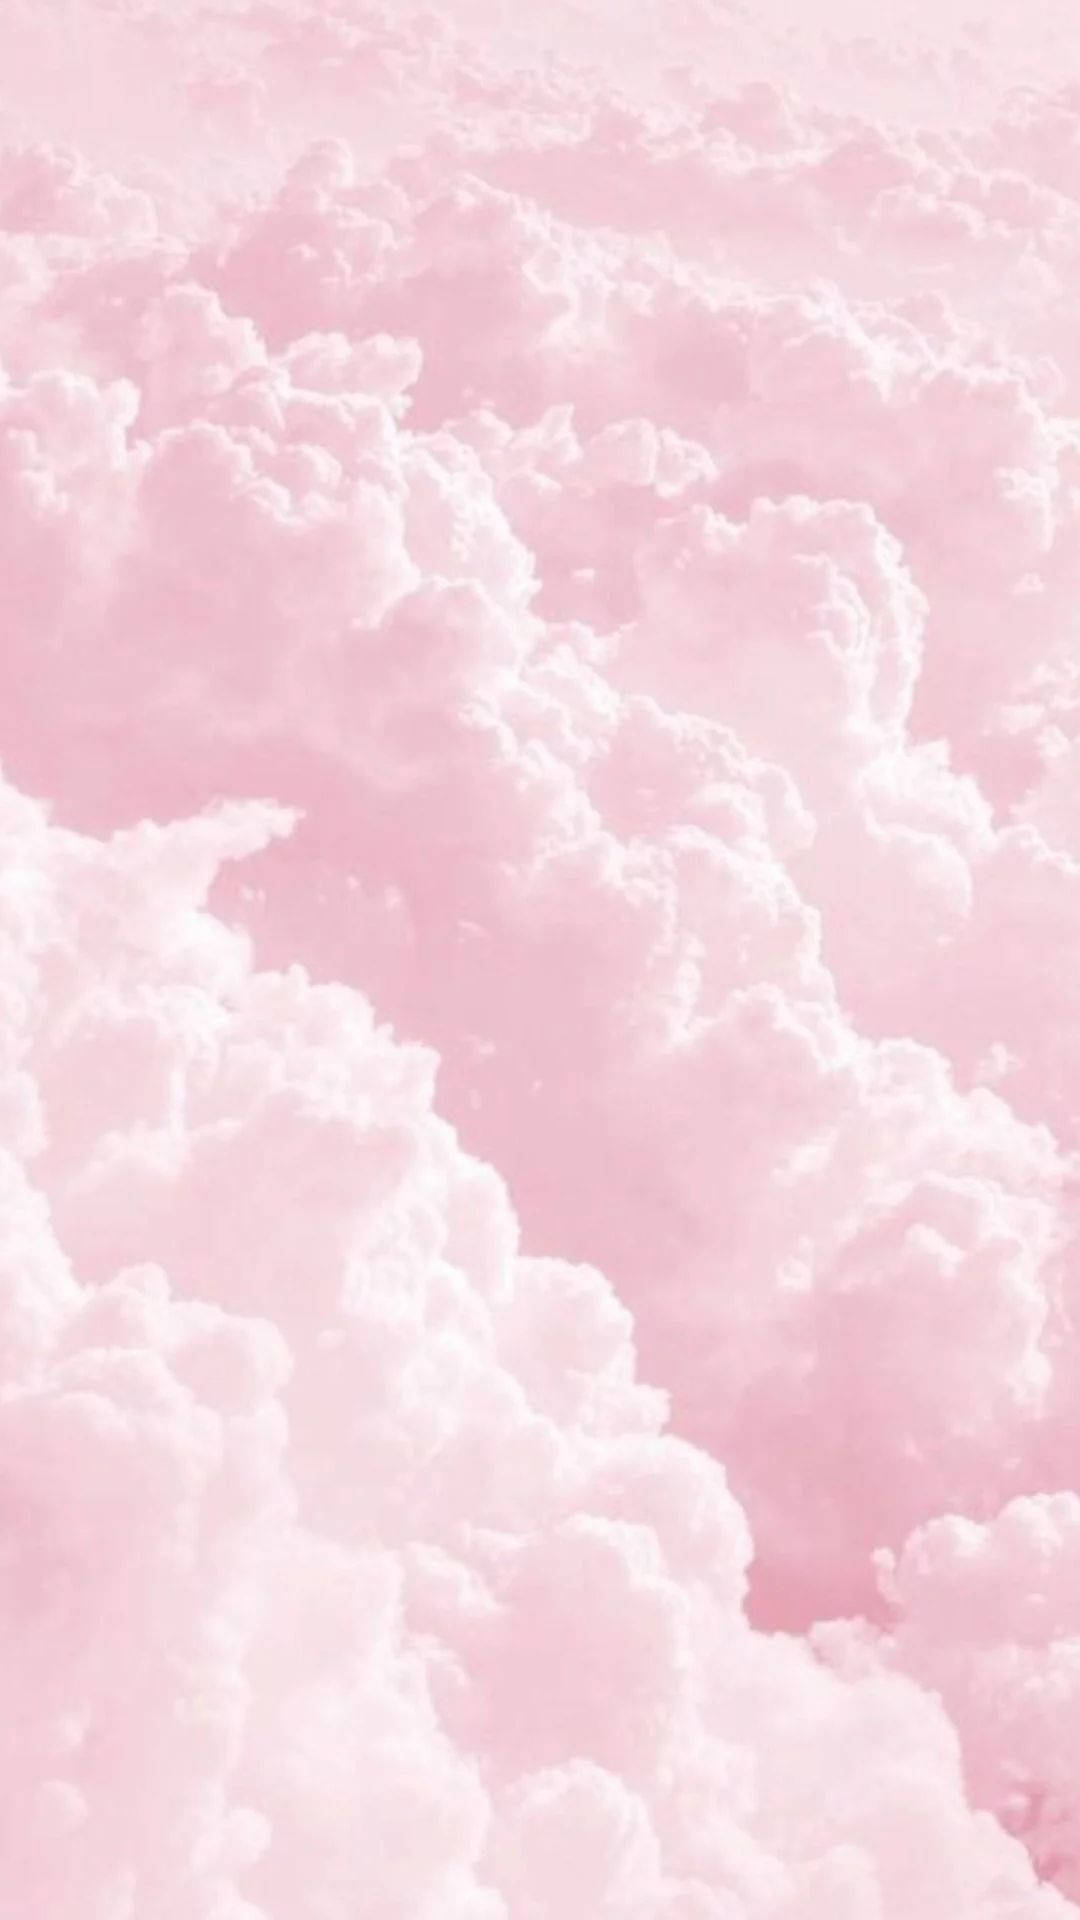 Aesthetic Pink Fluffy Clouds Wallpaper